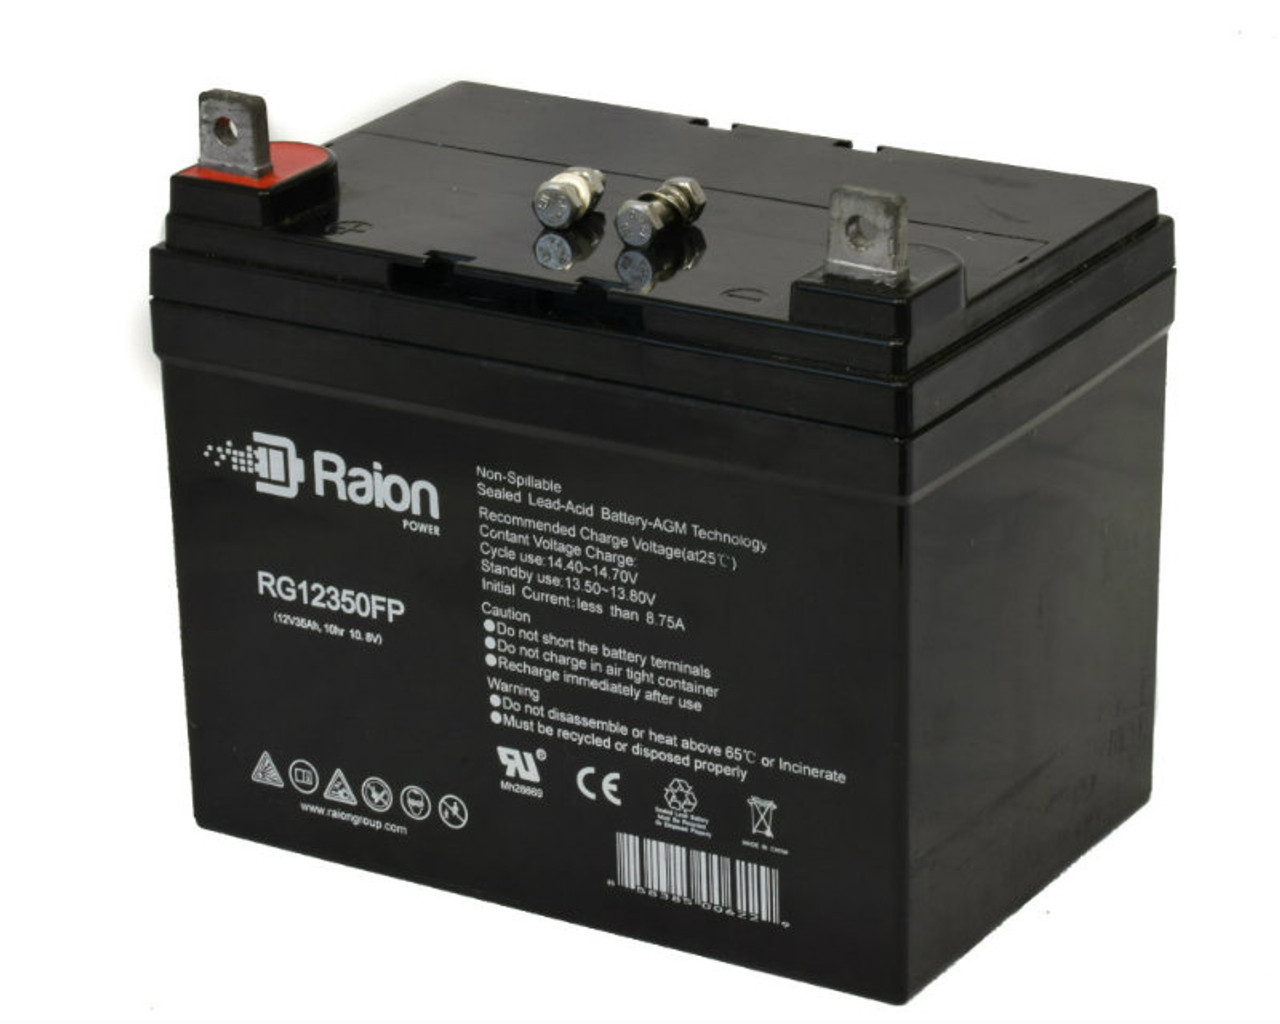 Raion Power Replacement 12V 35Ah RG12350FP Mobility Scooter Battery for Ranger All Season Safari